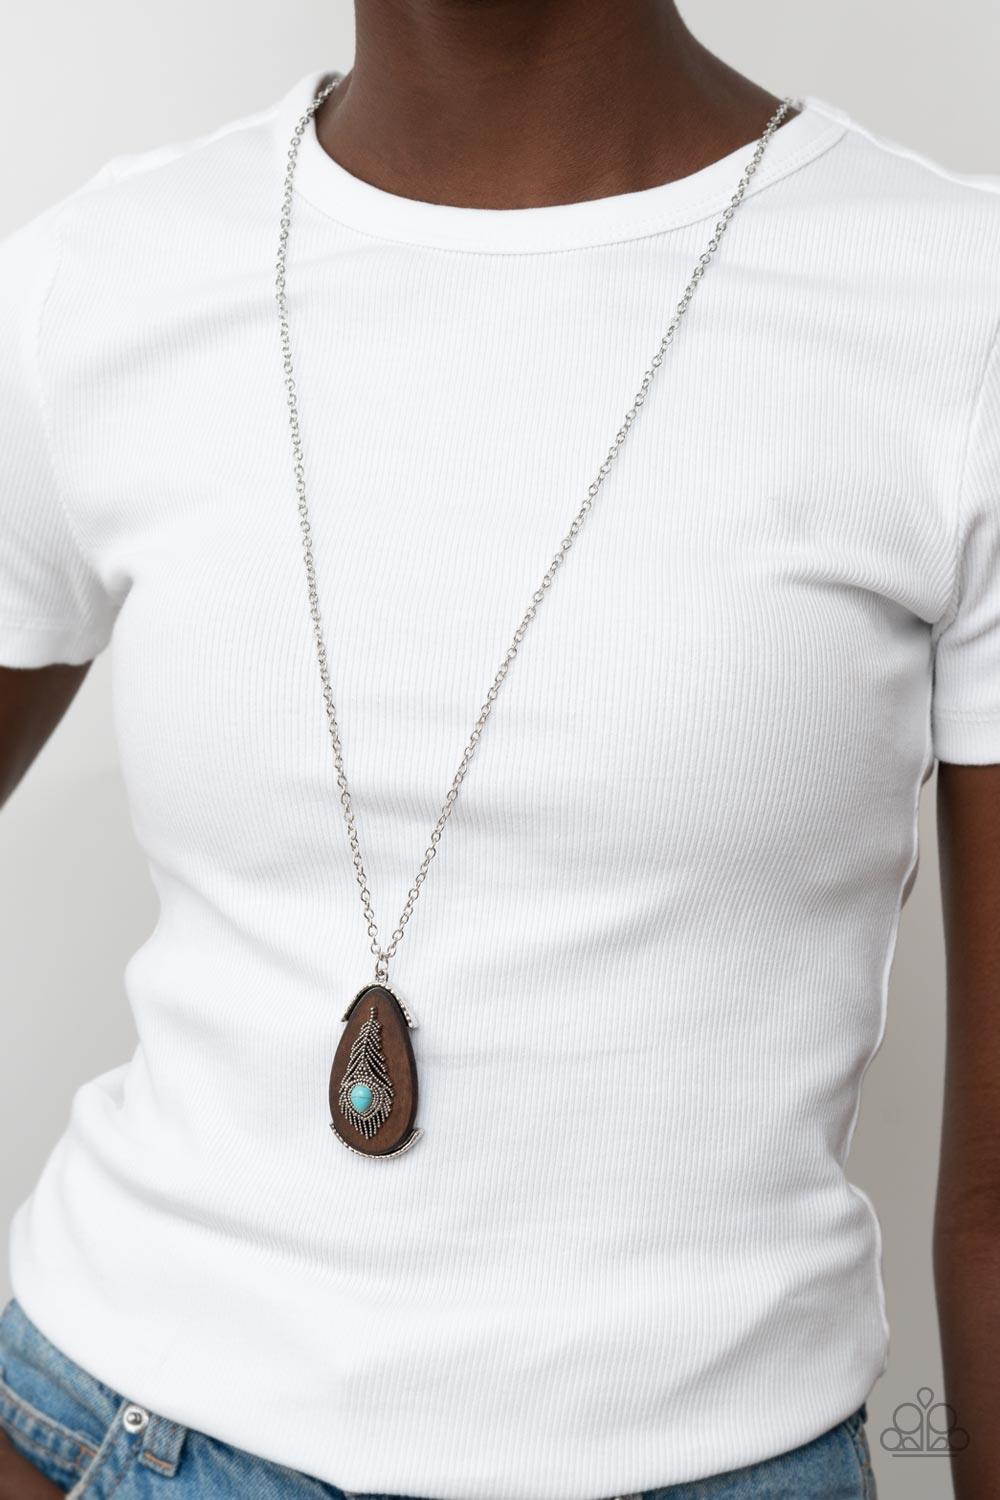 Personal FOWL Blue Necklace - Jewelry by Bretta